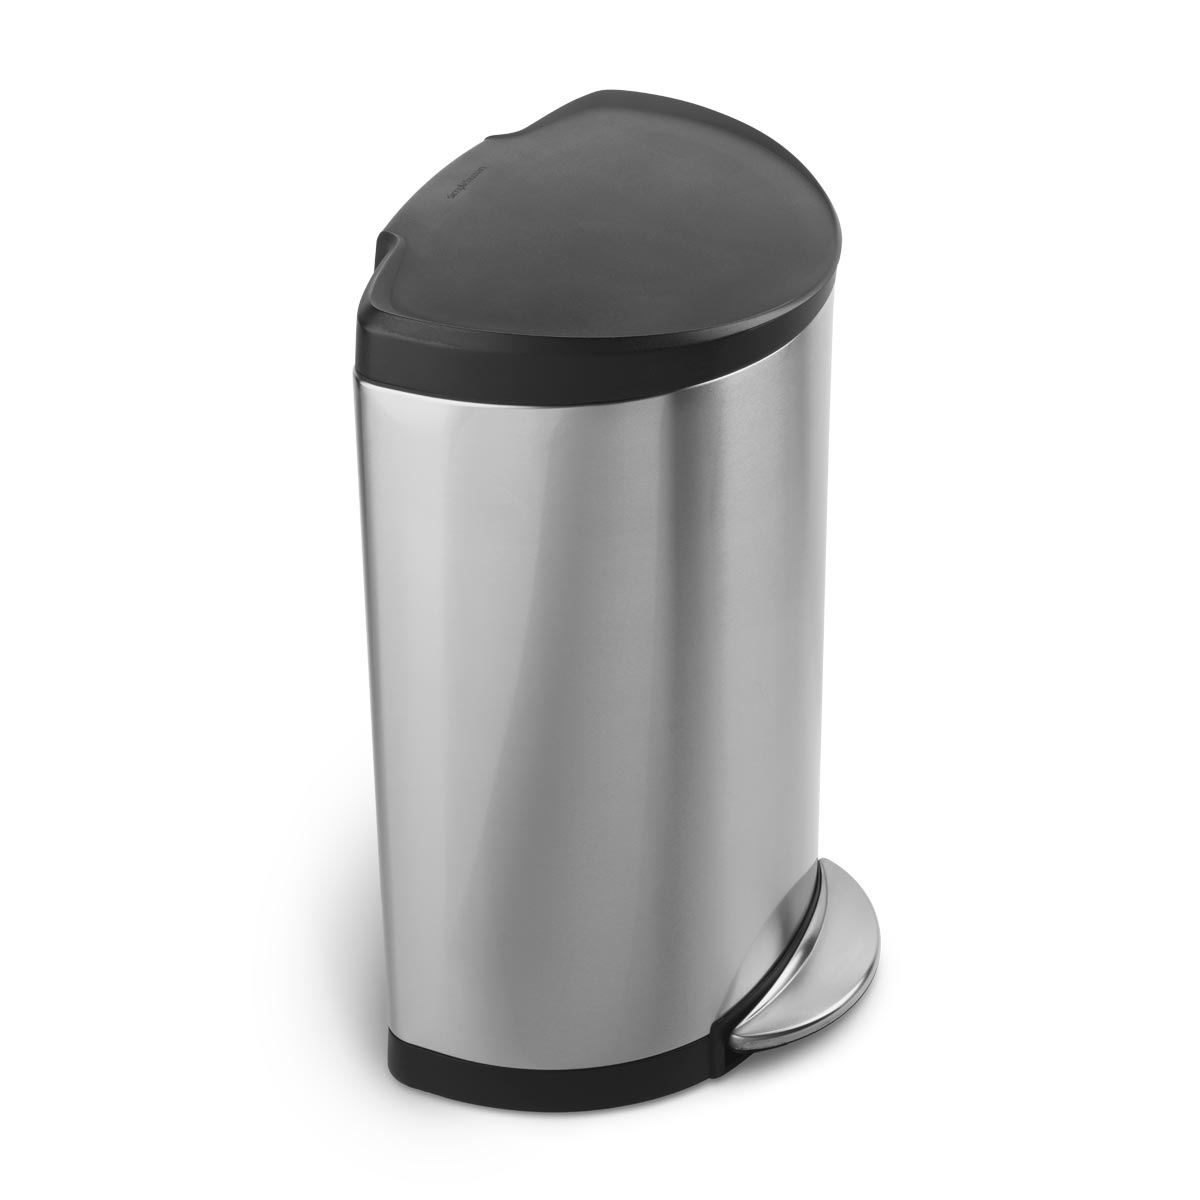 simplehuman 40 litre semi-round pedal bin with plastic lid, brushed stainless steel